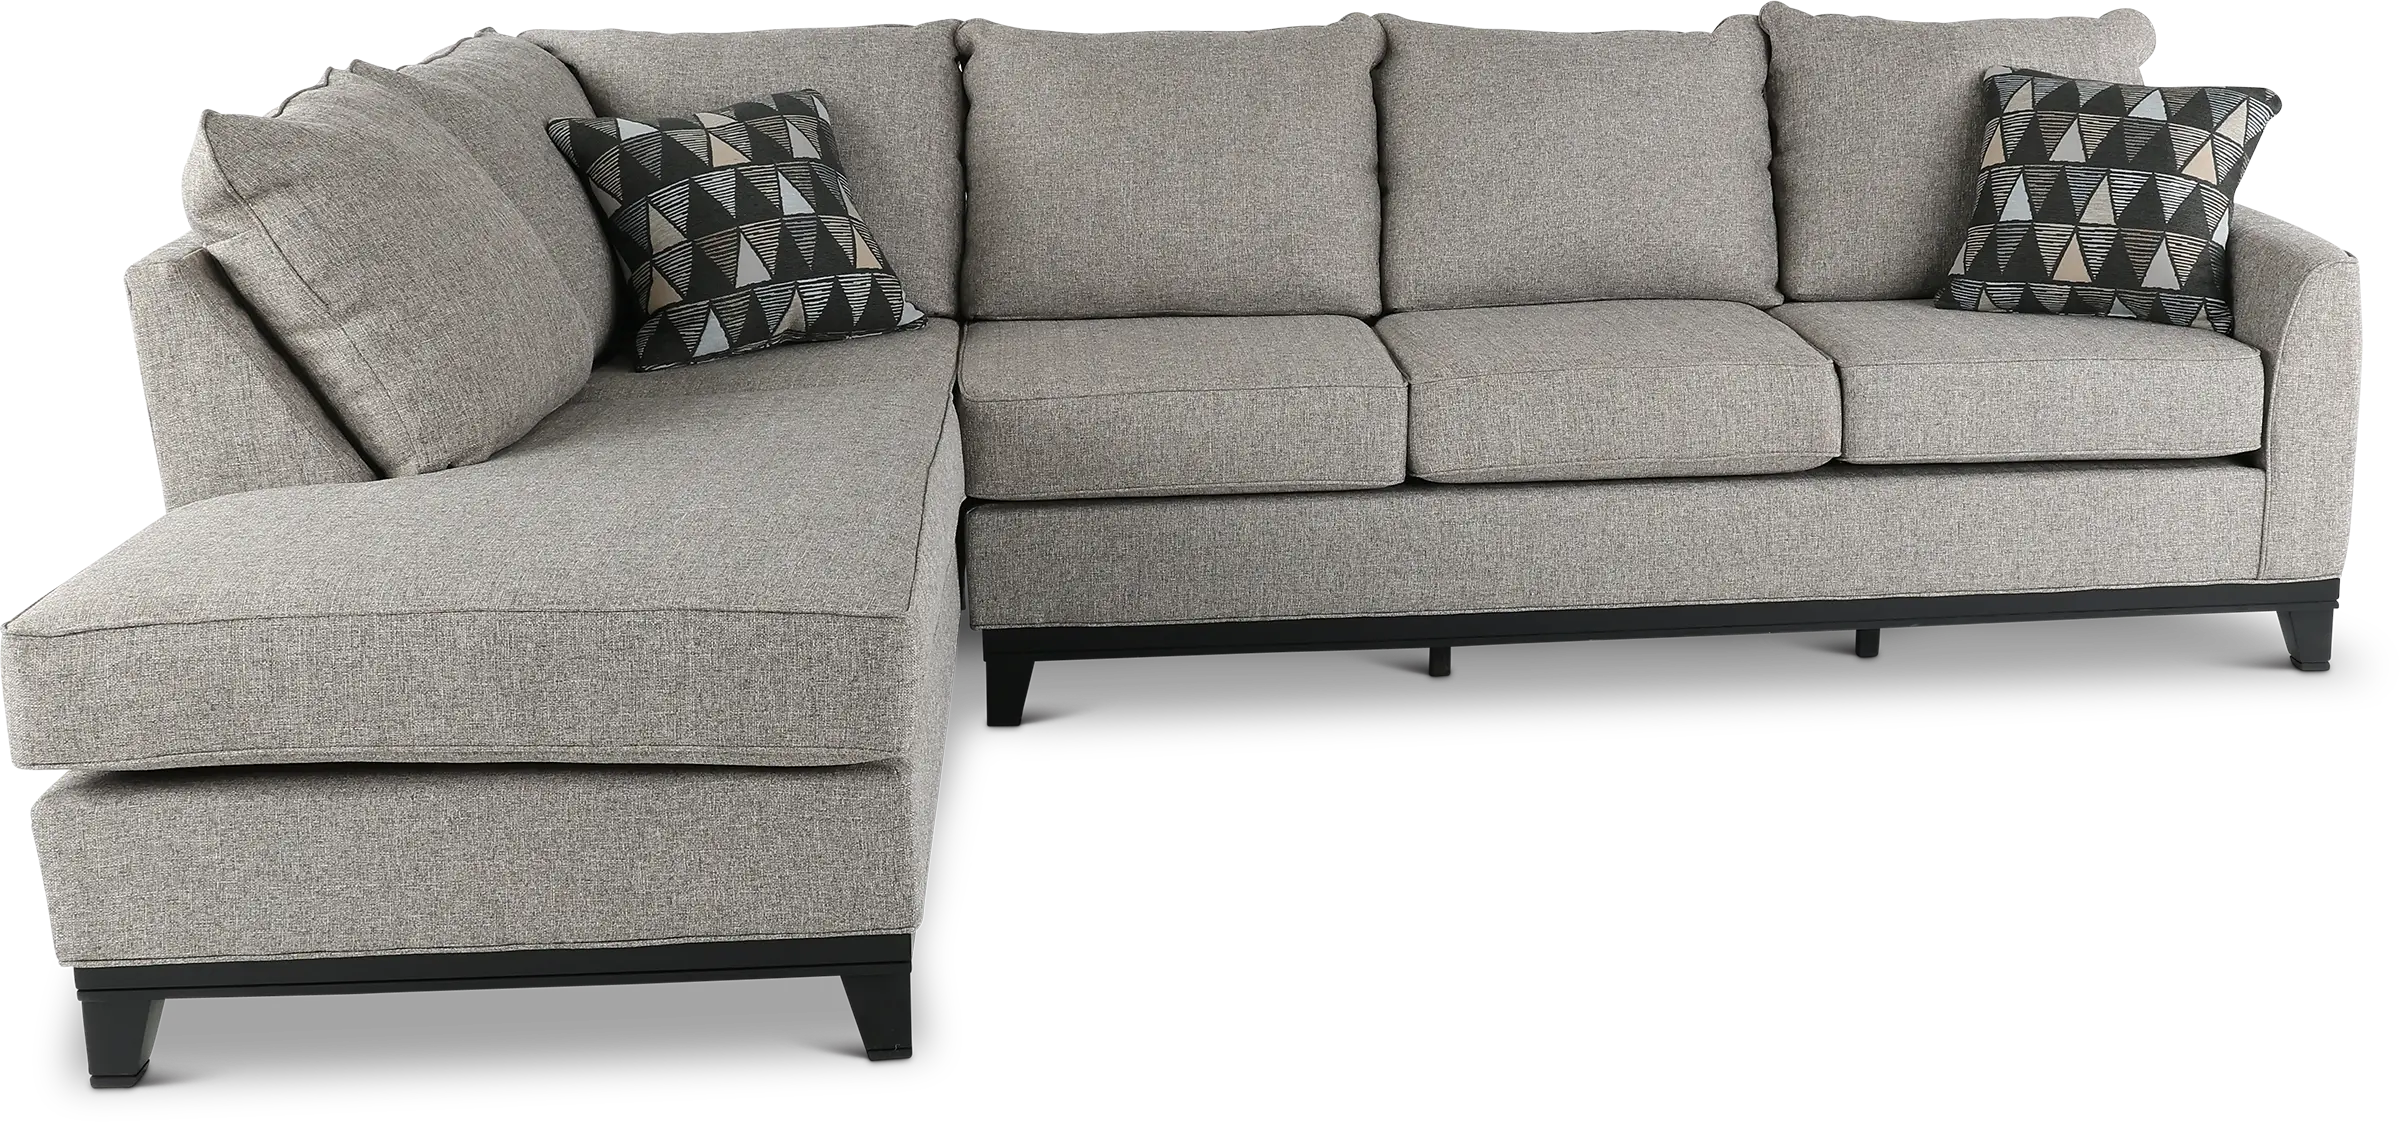 Emerson Gray 2 Piece Sectional Rc Willey